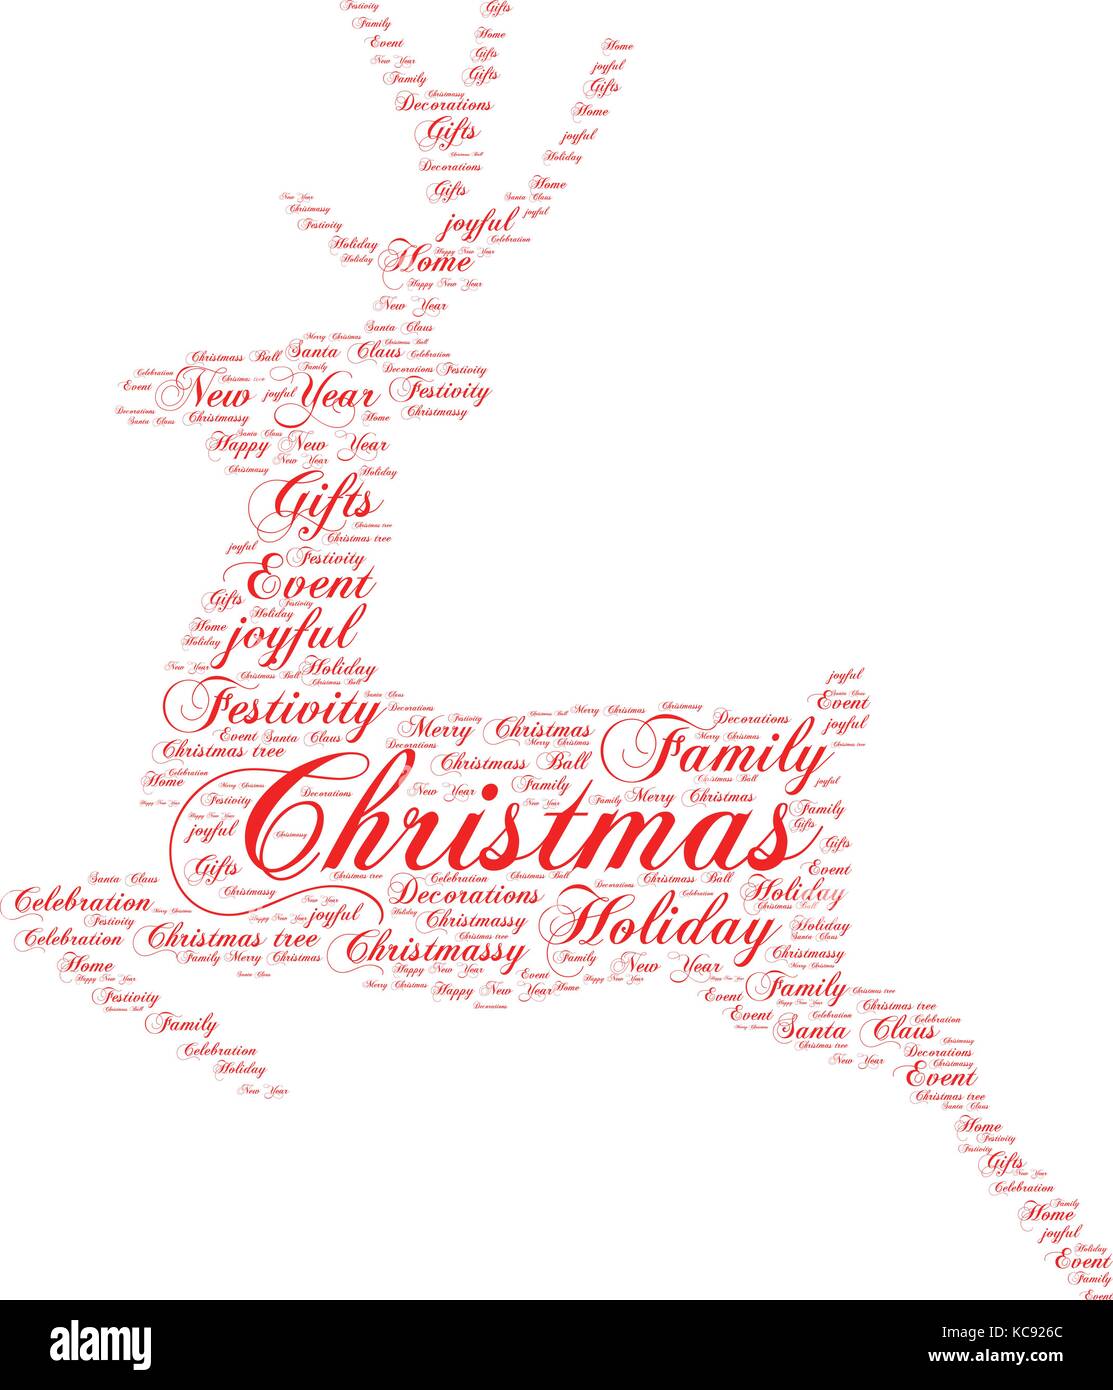 Words cloud, Christmas concept made with reindeer shape and tags on white background. Stock Vector